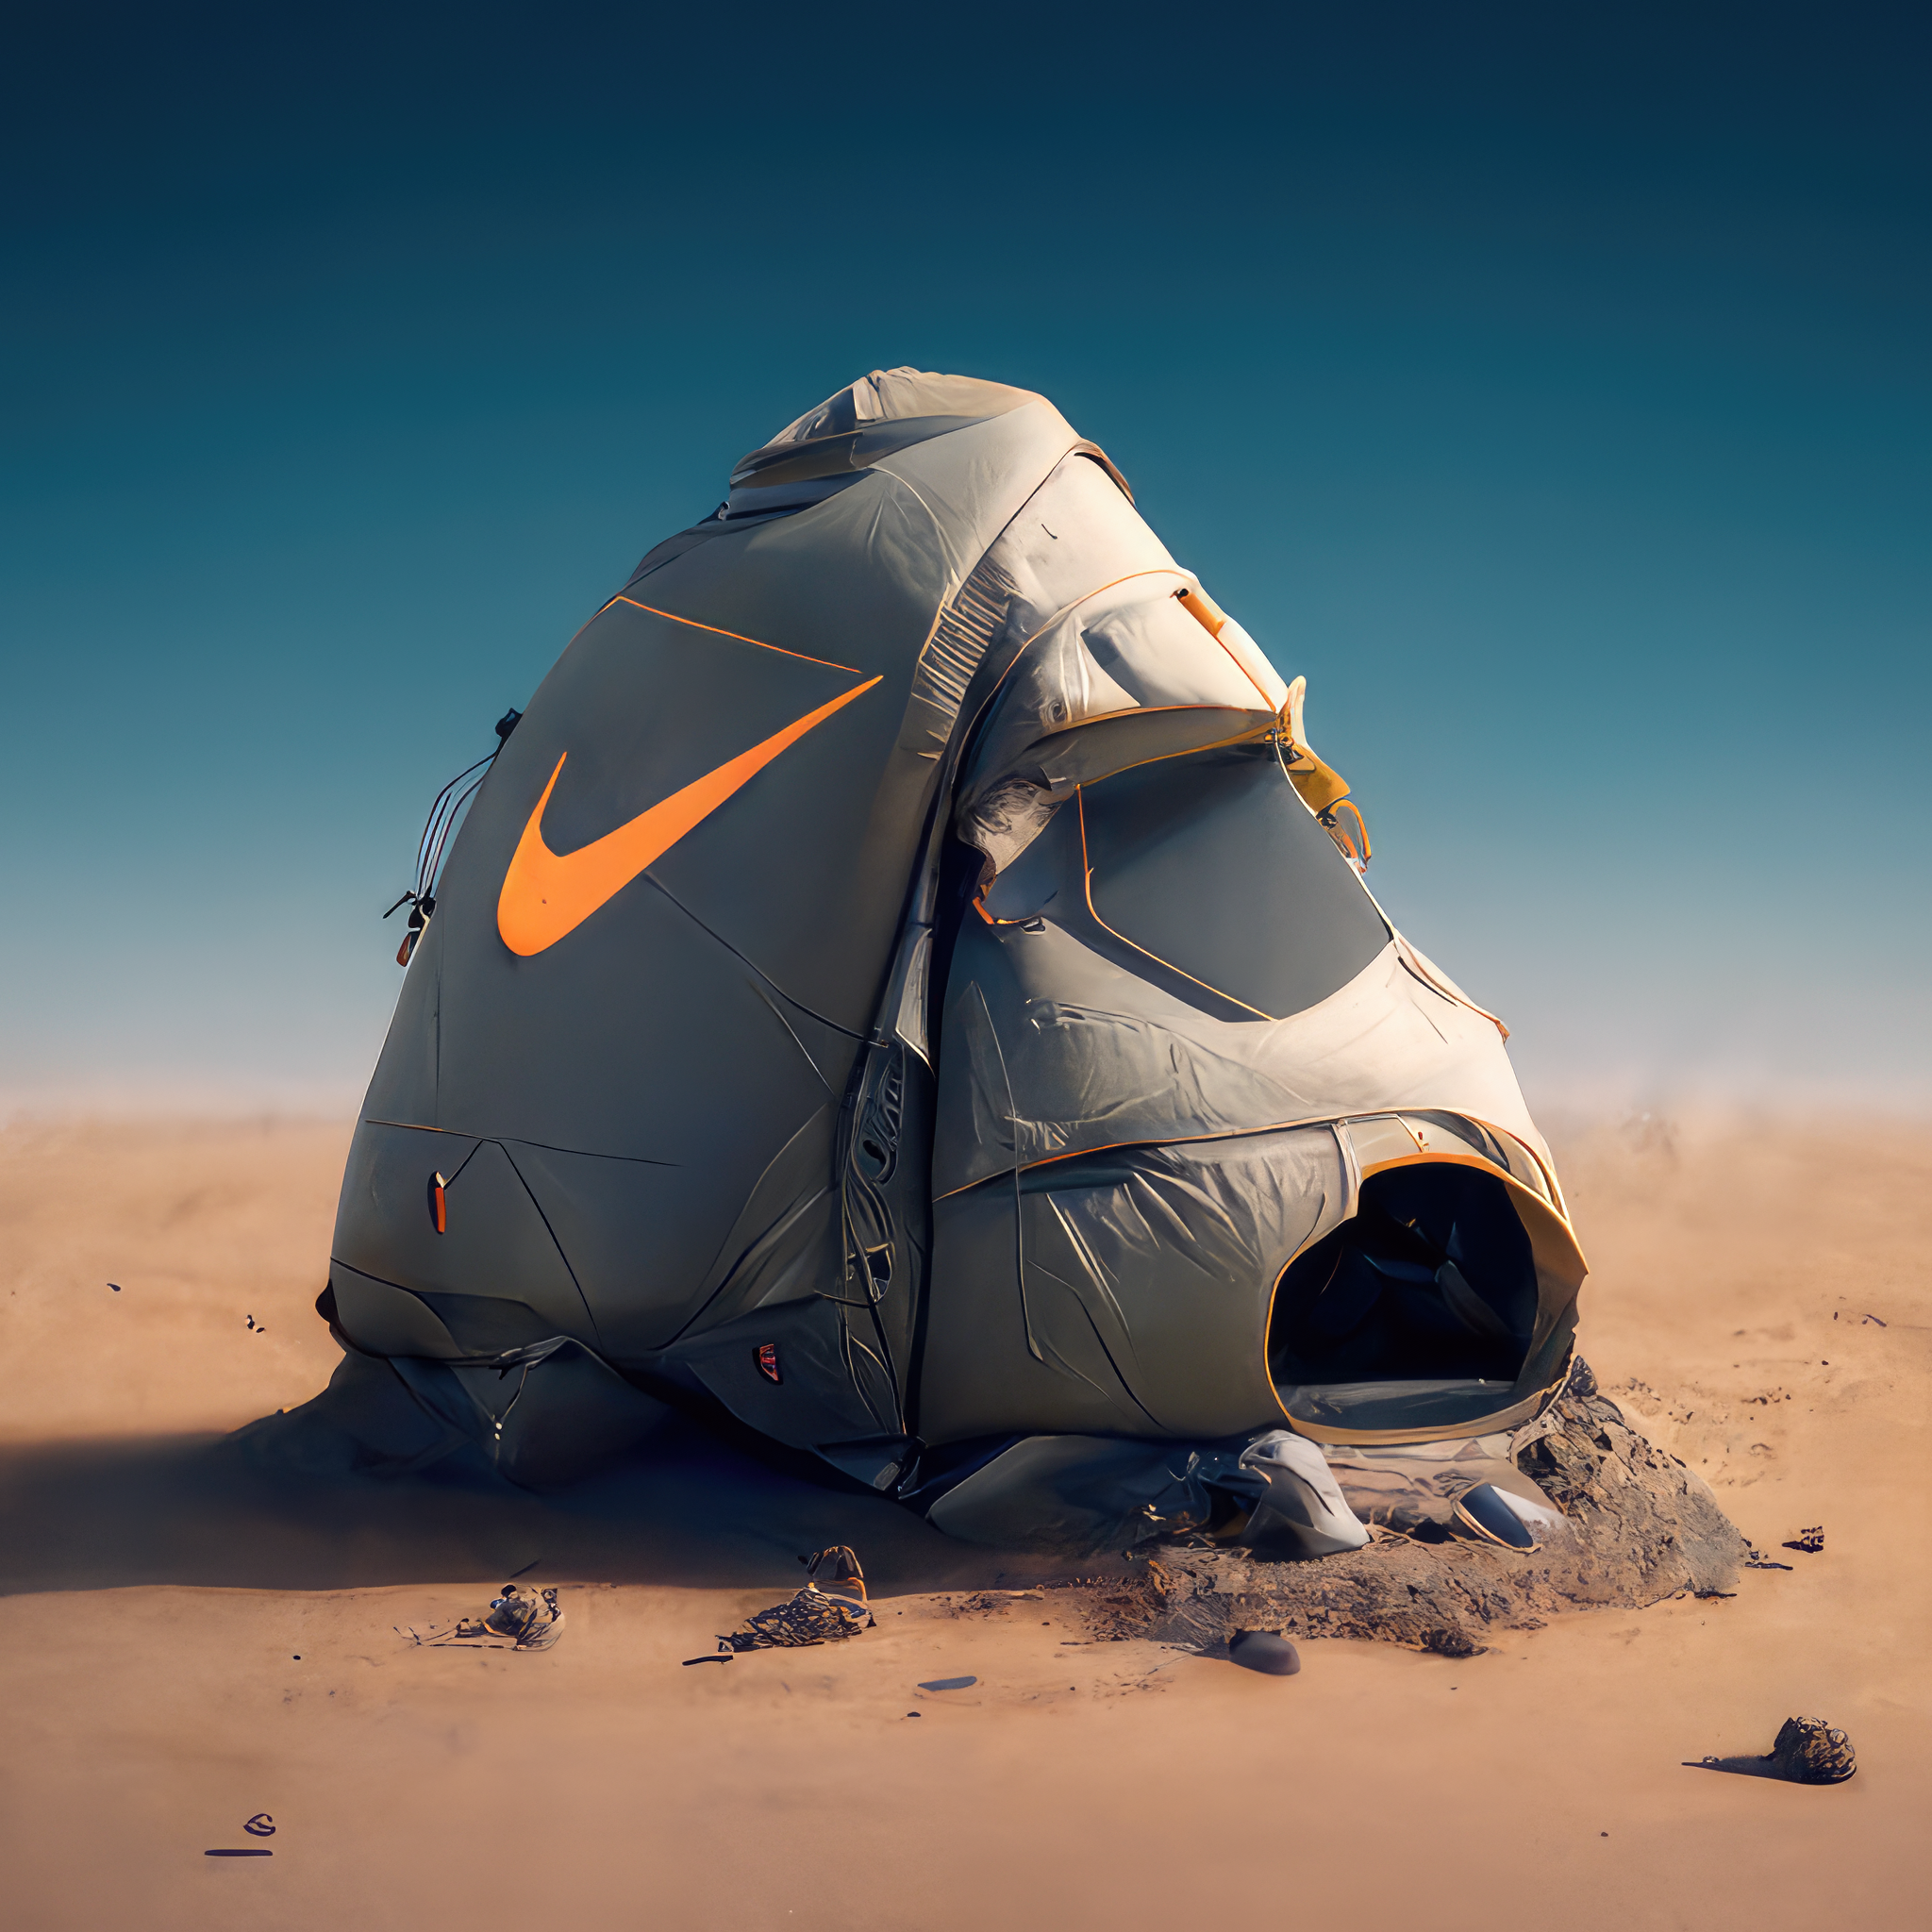 tonycncp_tent_nike_northface_tech_apple_airpod__armored_on_the__2fced8e4-df86-4f75-8ab8-4b06d31da46a-gigapixel-standard-scale-4_00x.png